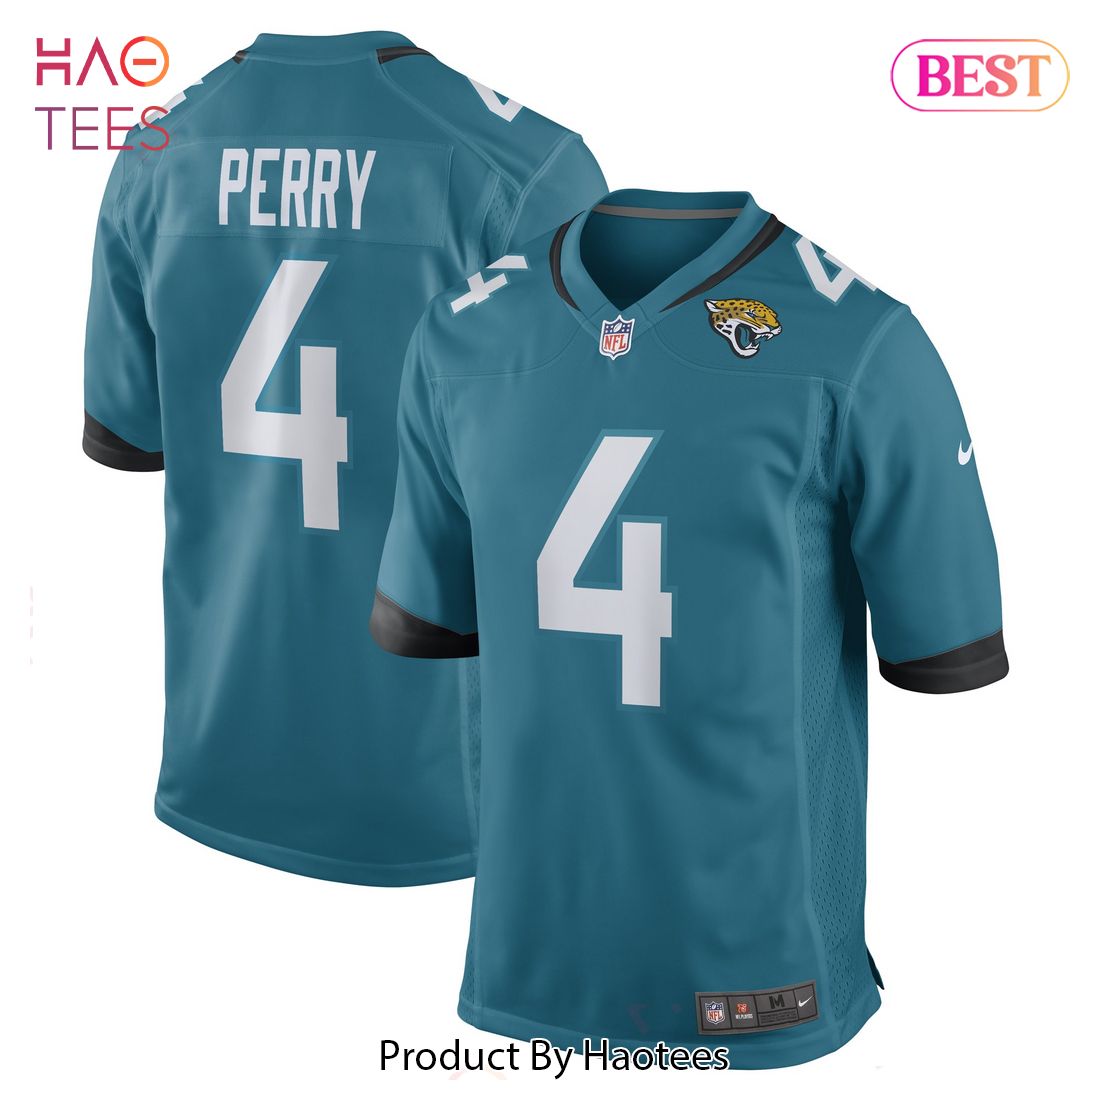 E.J. Perry Jacksonville Jaguars Nike Game Player Jersey Teal